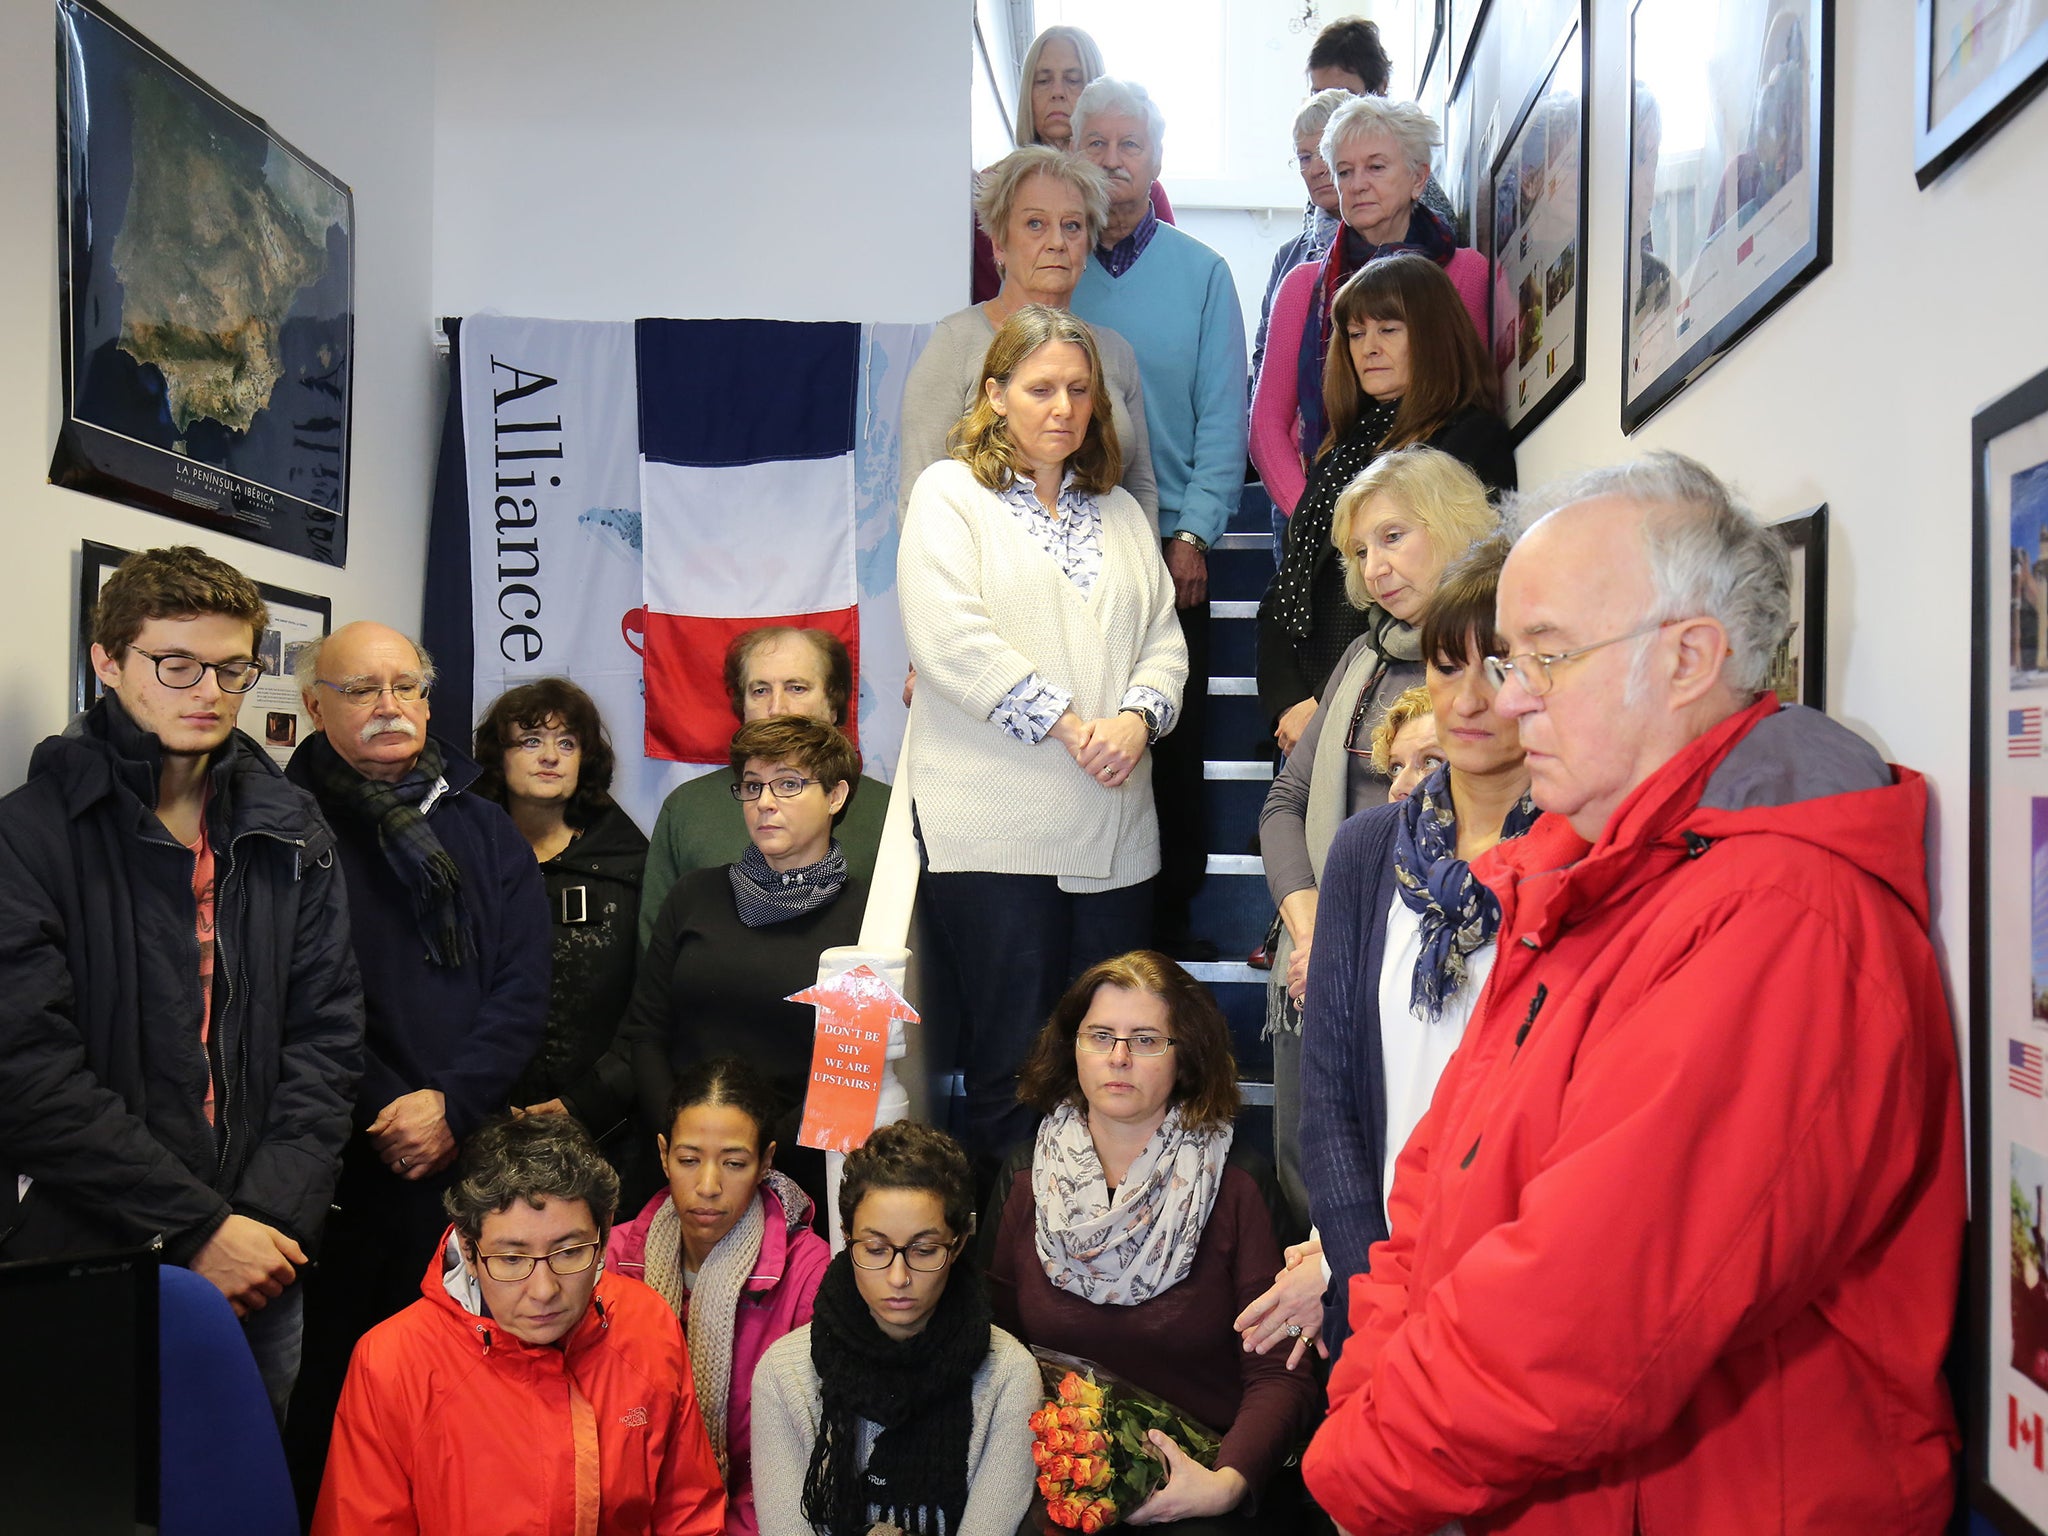 People inside the Alliance Franaise de Cambridge in Cambridge during a minute's silence to mark the victims of the attacks in the French capital